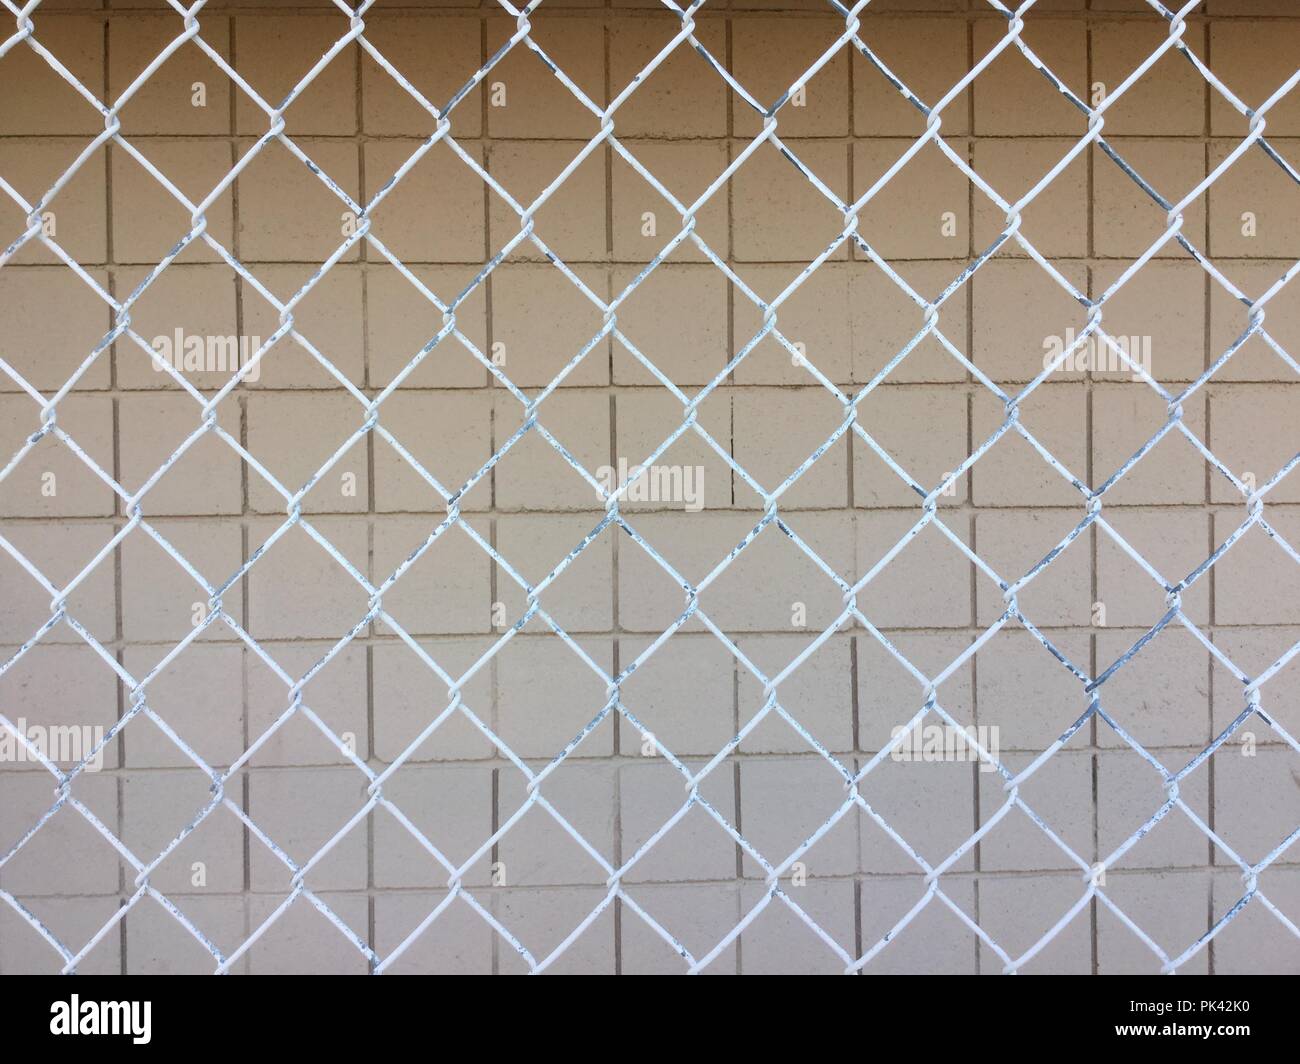 Square blocks white, behind chain link fencing. Stock Photo